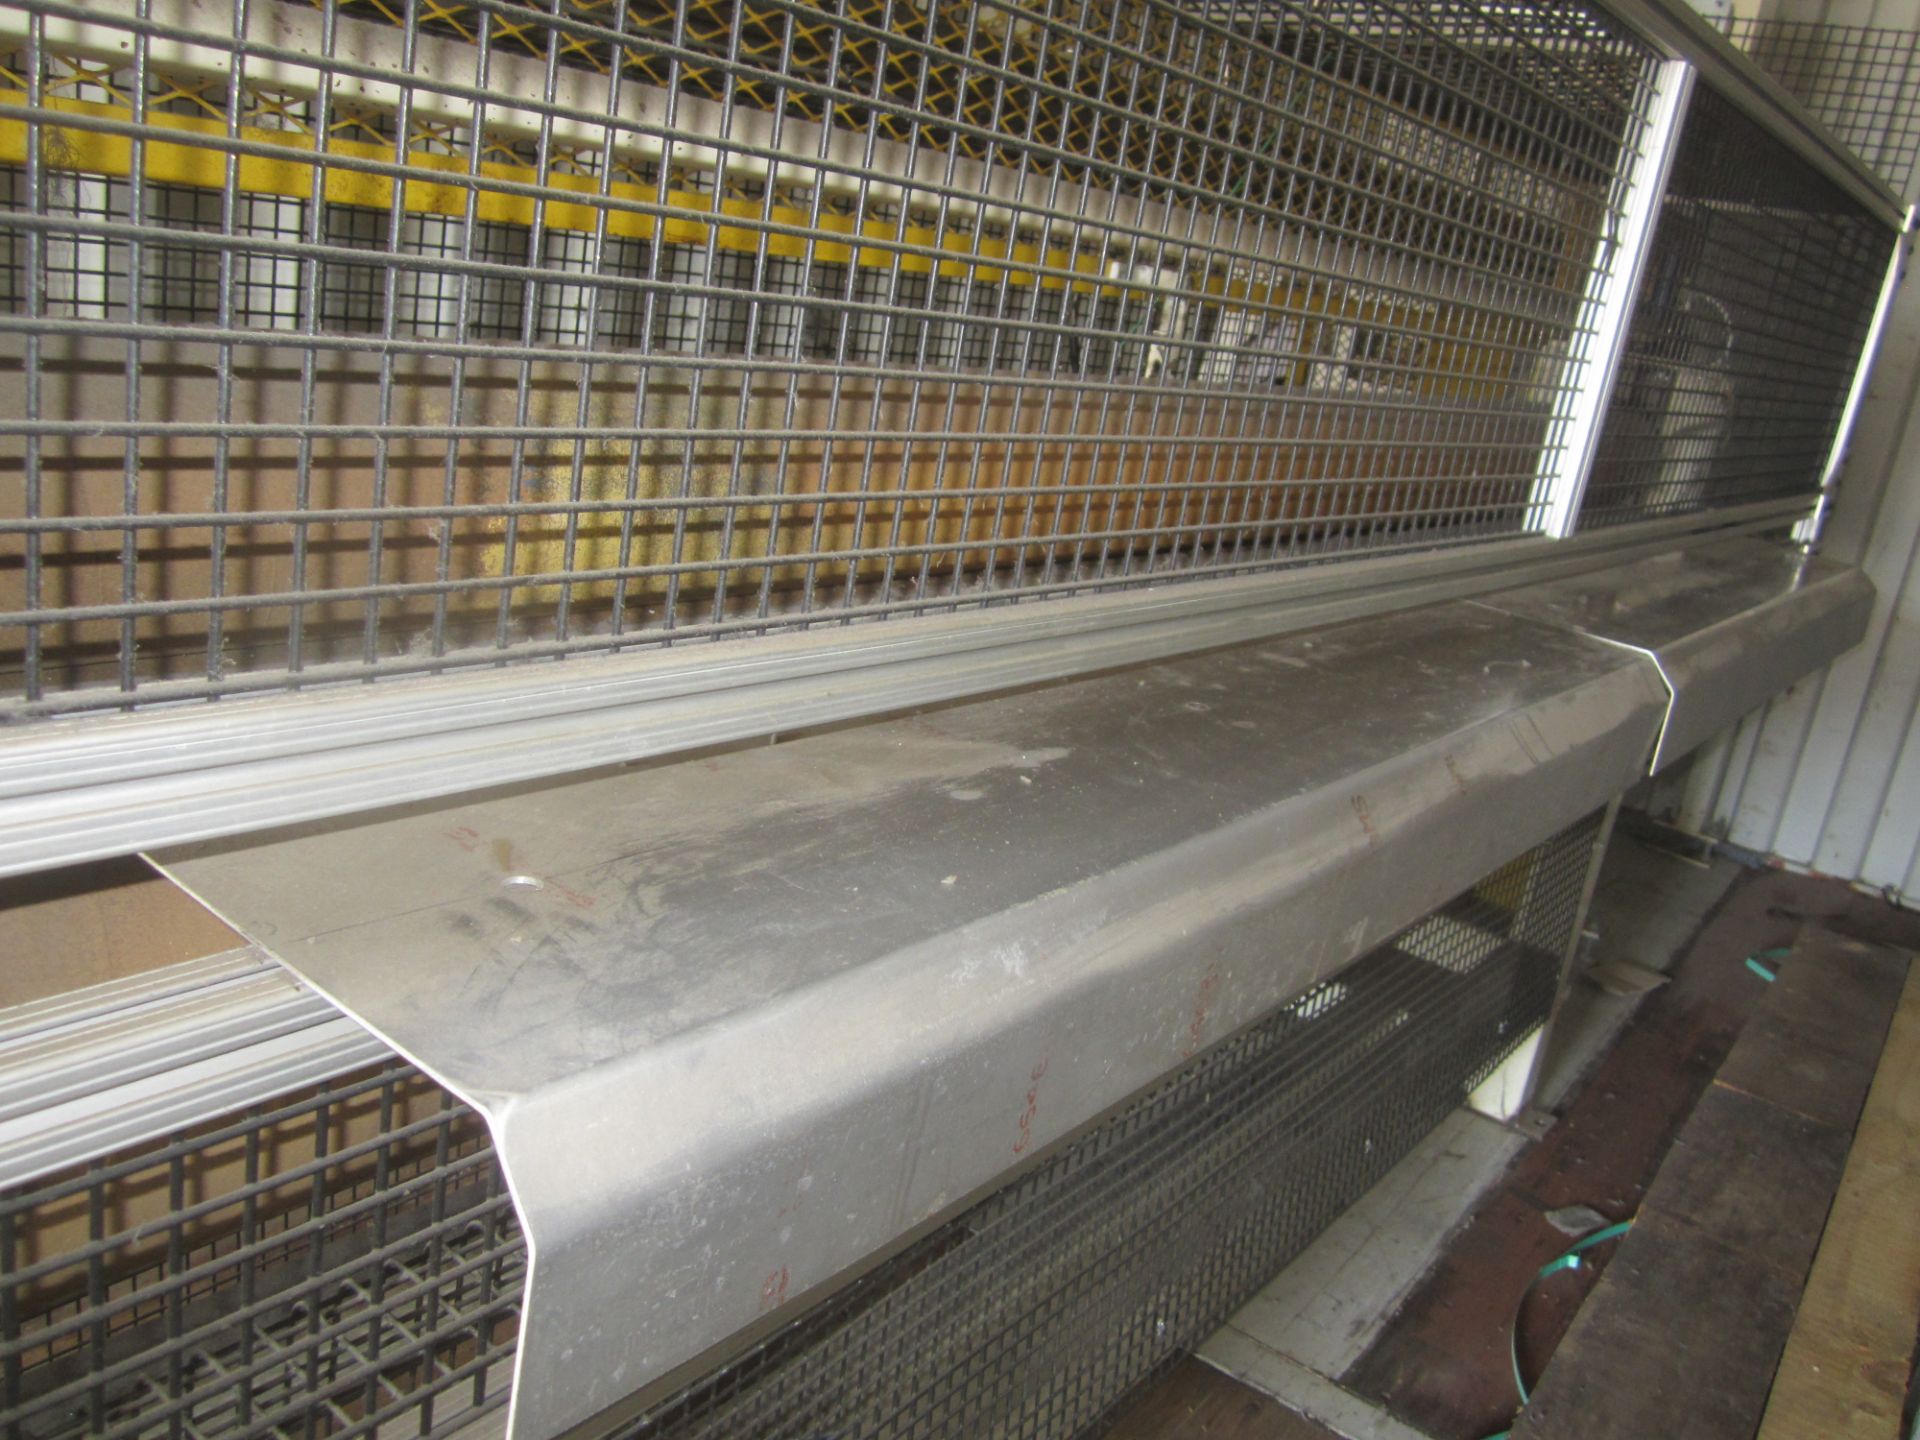 Birch Brothers Fabric Feed Roll/Cutter, s/n 1196-176, 8' Max. Material Width, Overhead Travelling - Image 5 of 15